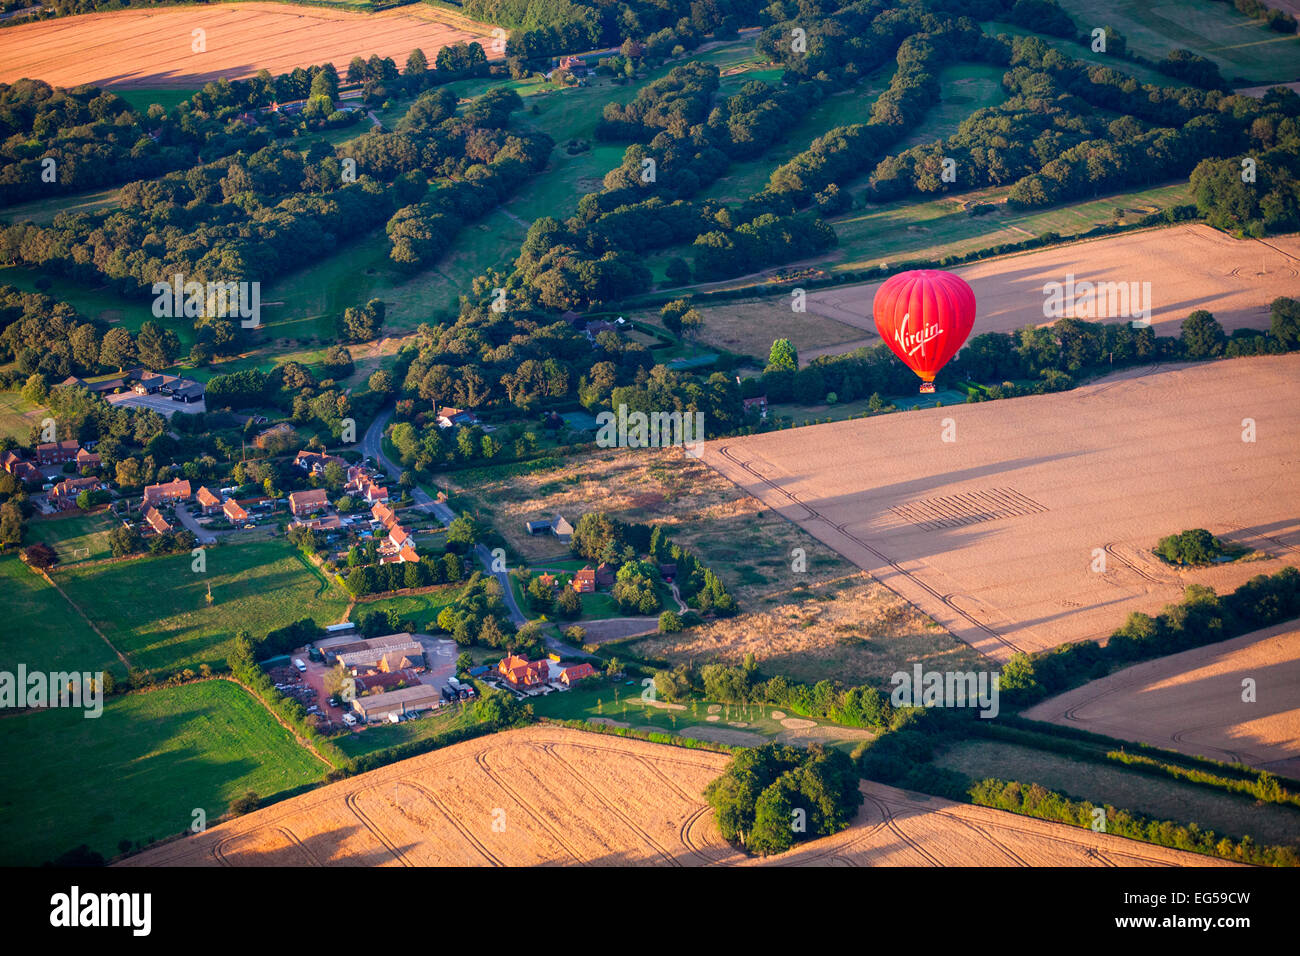 Aerial view of red hot air balloon flying over rural landscape, South Oxfordshire, England Stock Photo